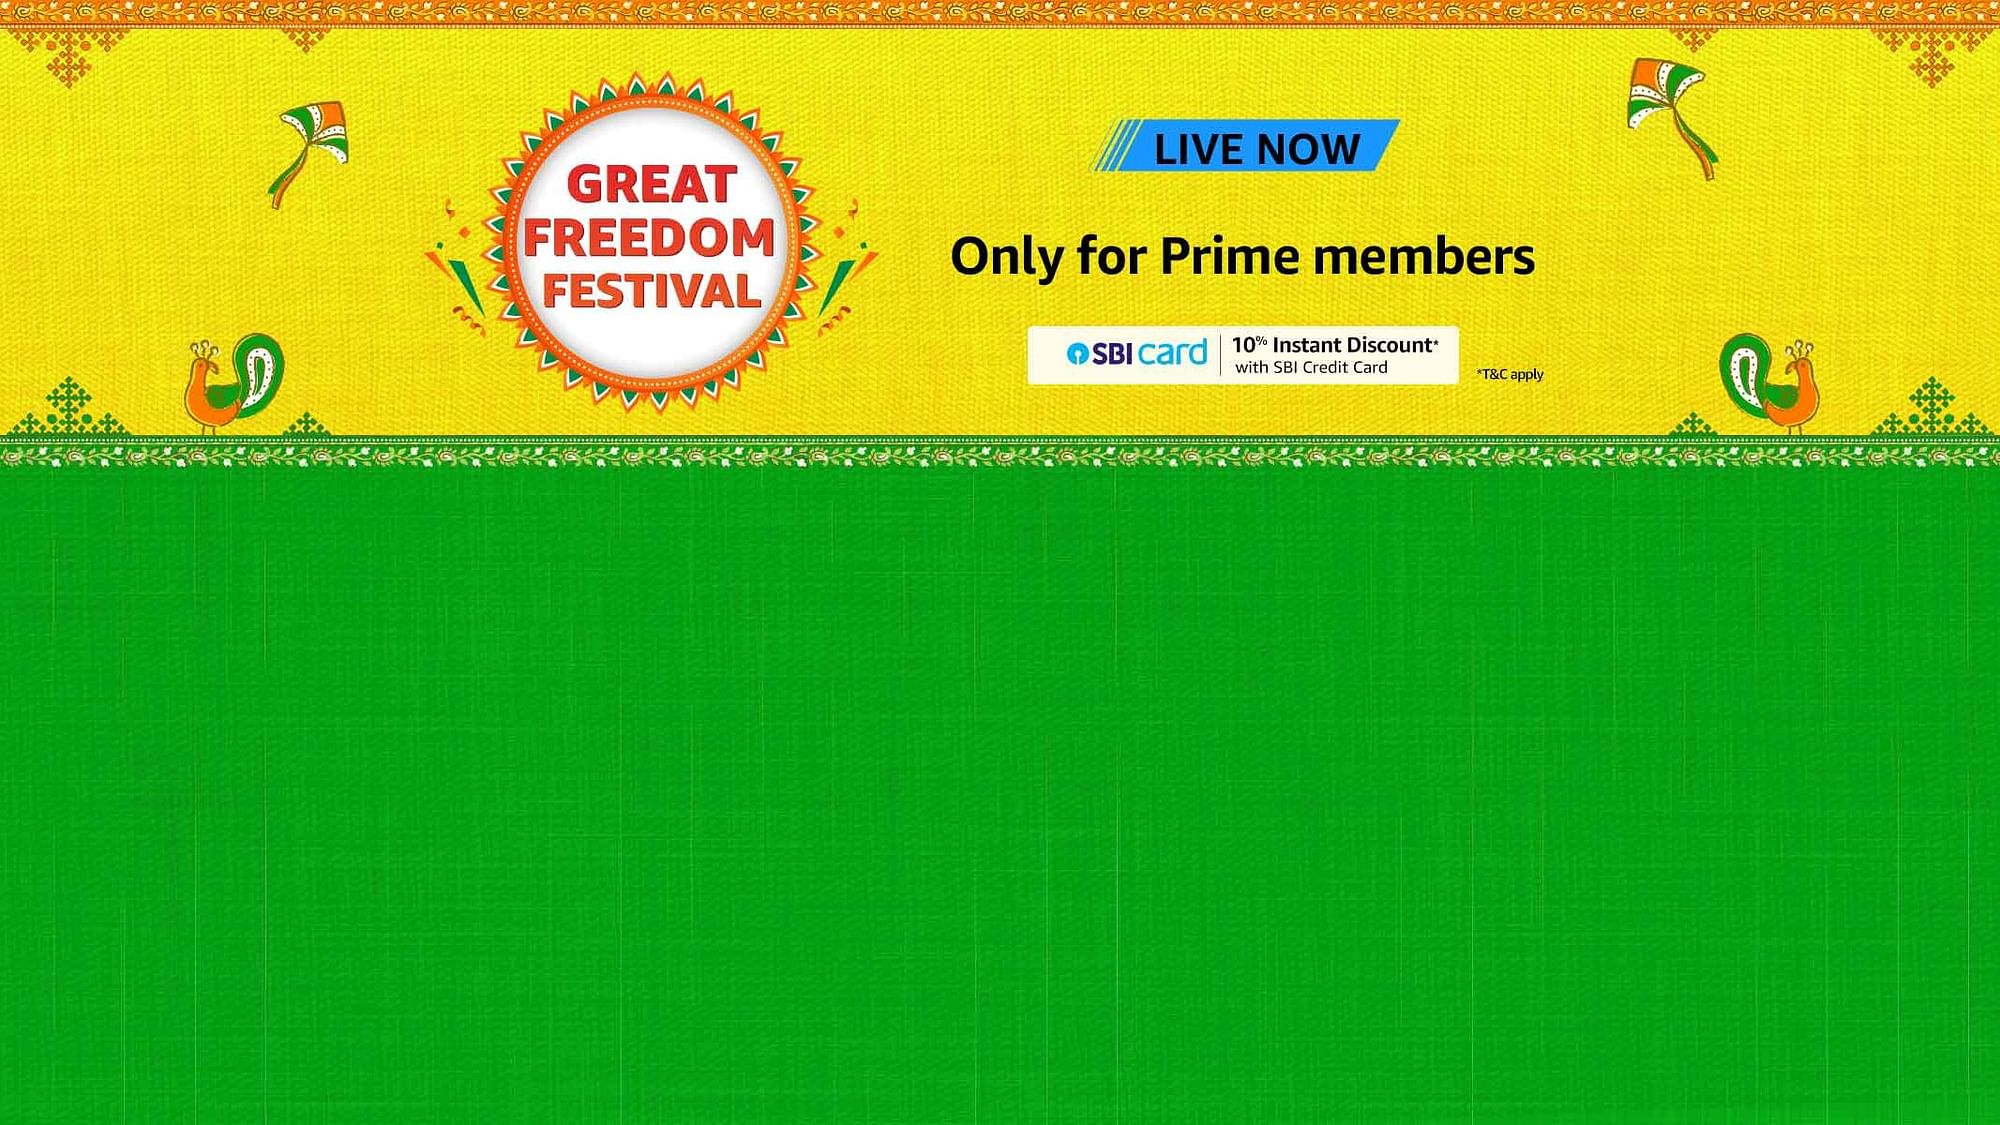 <div class="paragraphs"><p>Amazon Great Freedom Festival 2022 is live now for the Prime members.</p></div>